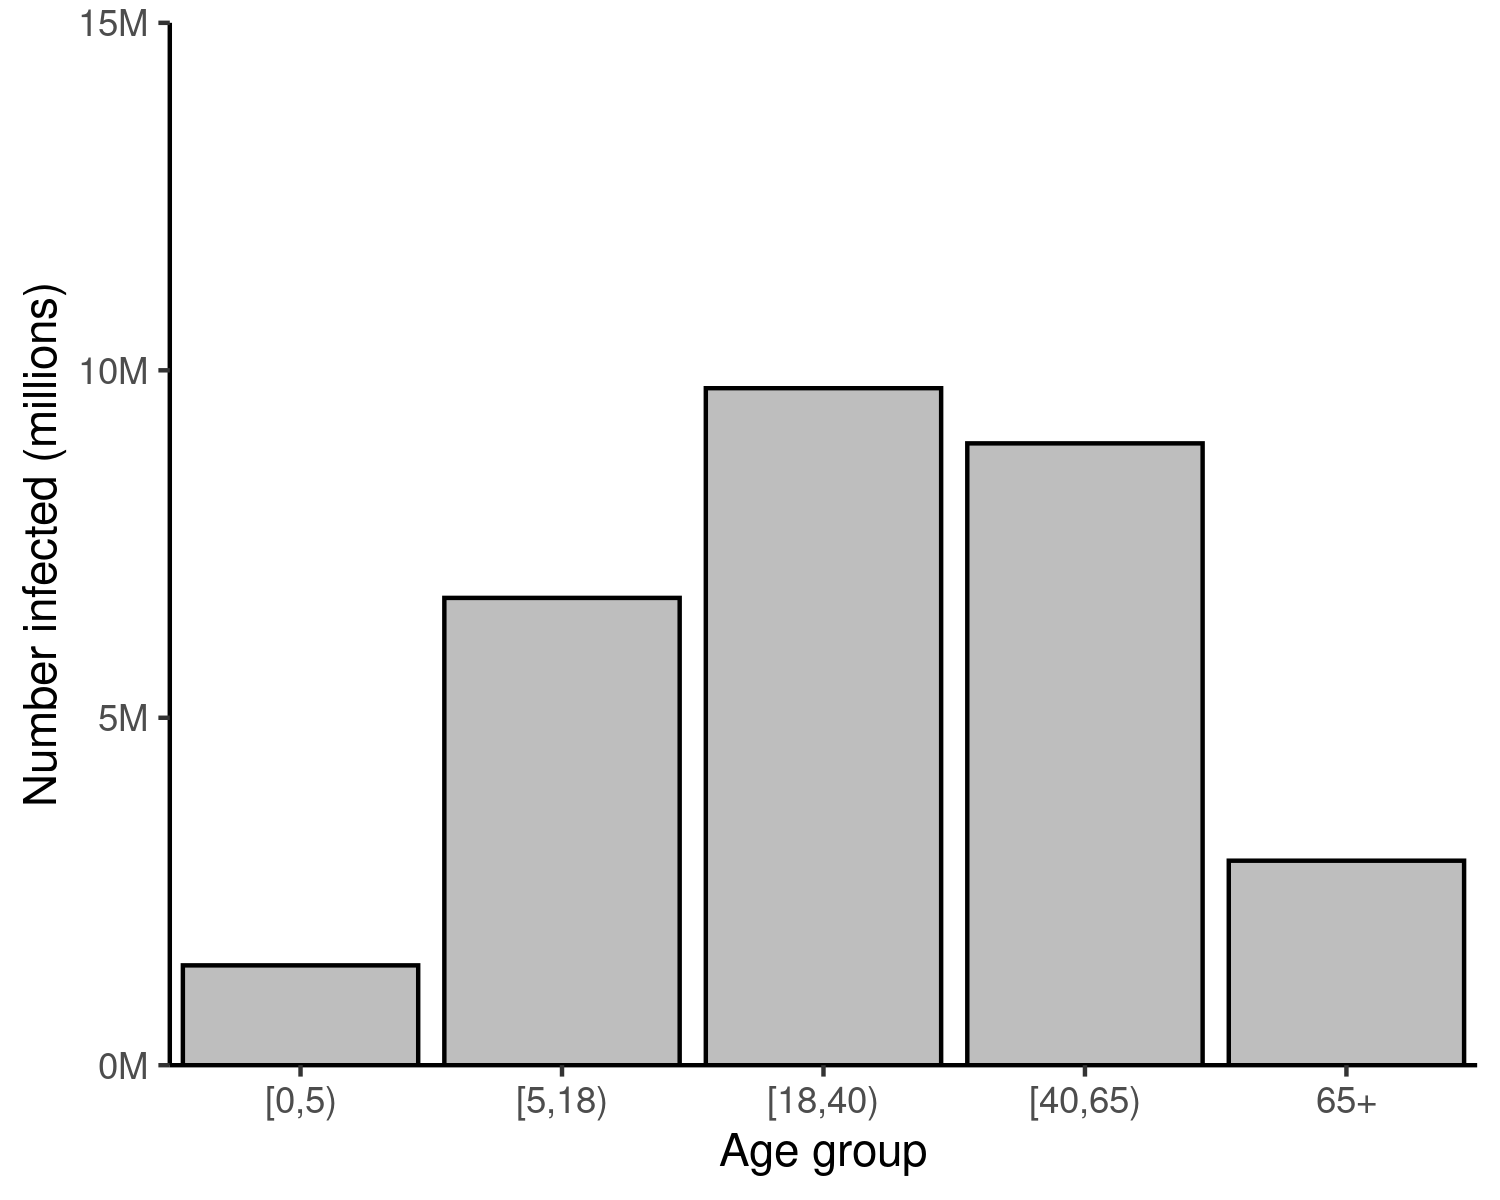 Final size of an epidemic outbreak in a population, for different values of infection $R_0$. Converting the final size proportions in each age group to counts shows that individuals aged 18 -- 64 make up the bulk of cases in this scenario. This may be attributed to this being both the largest age range in the analysis (more years in this range than any other), and because more people fall into this wide range than others. Contrast this figure with the one above, in which similar _proportions_ of each age group are infected.